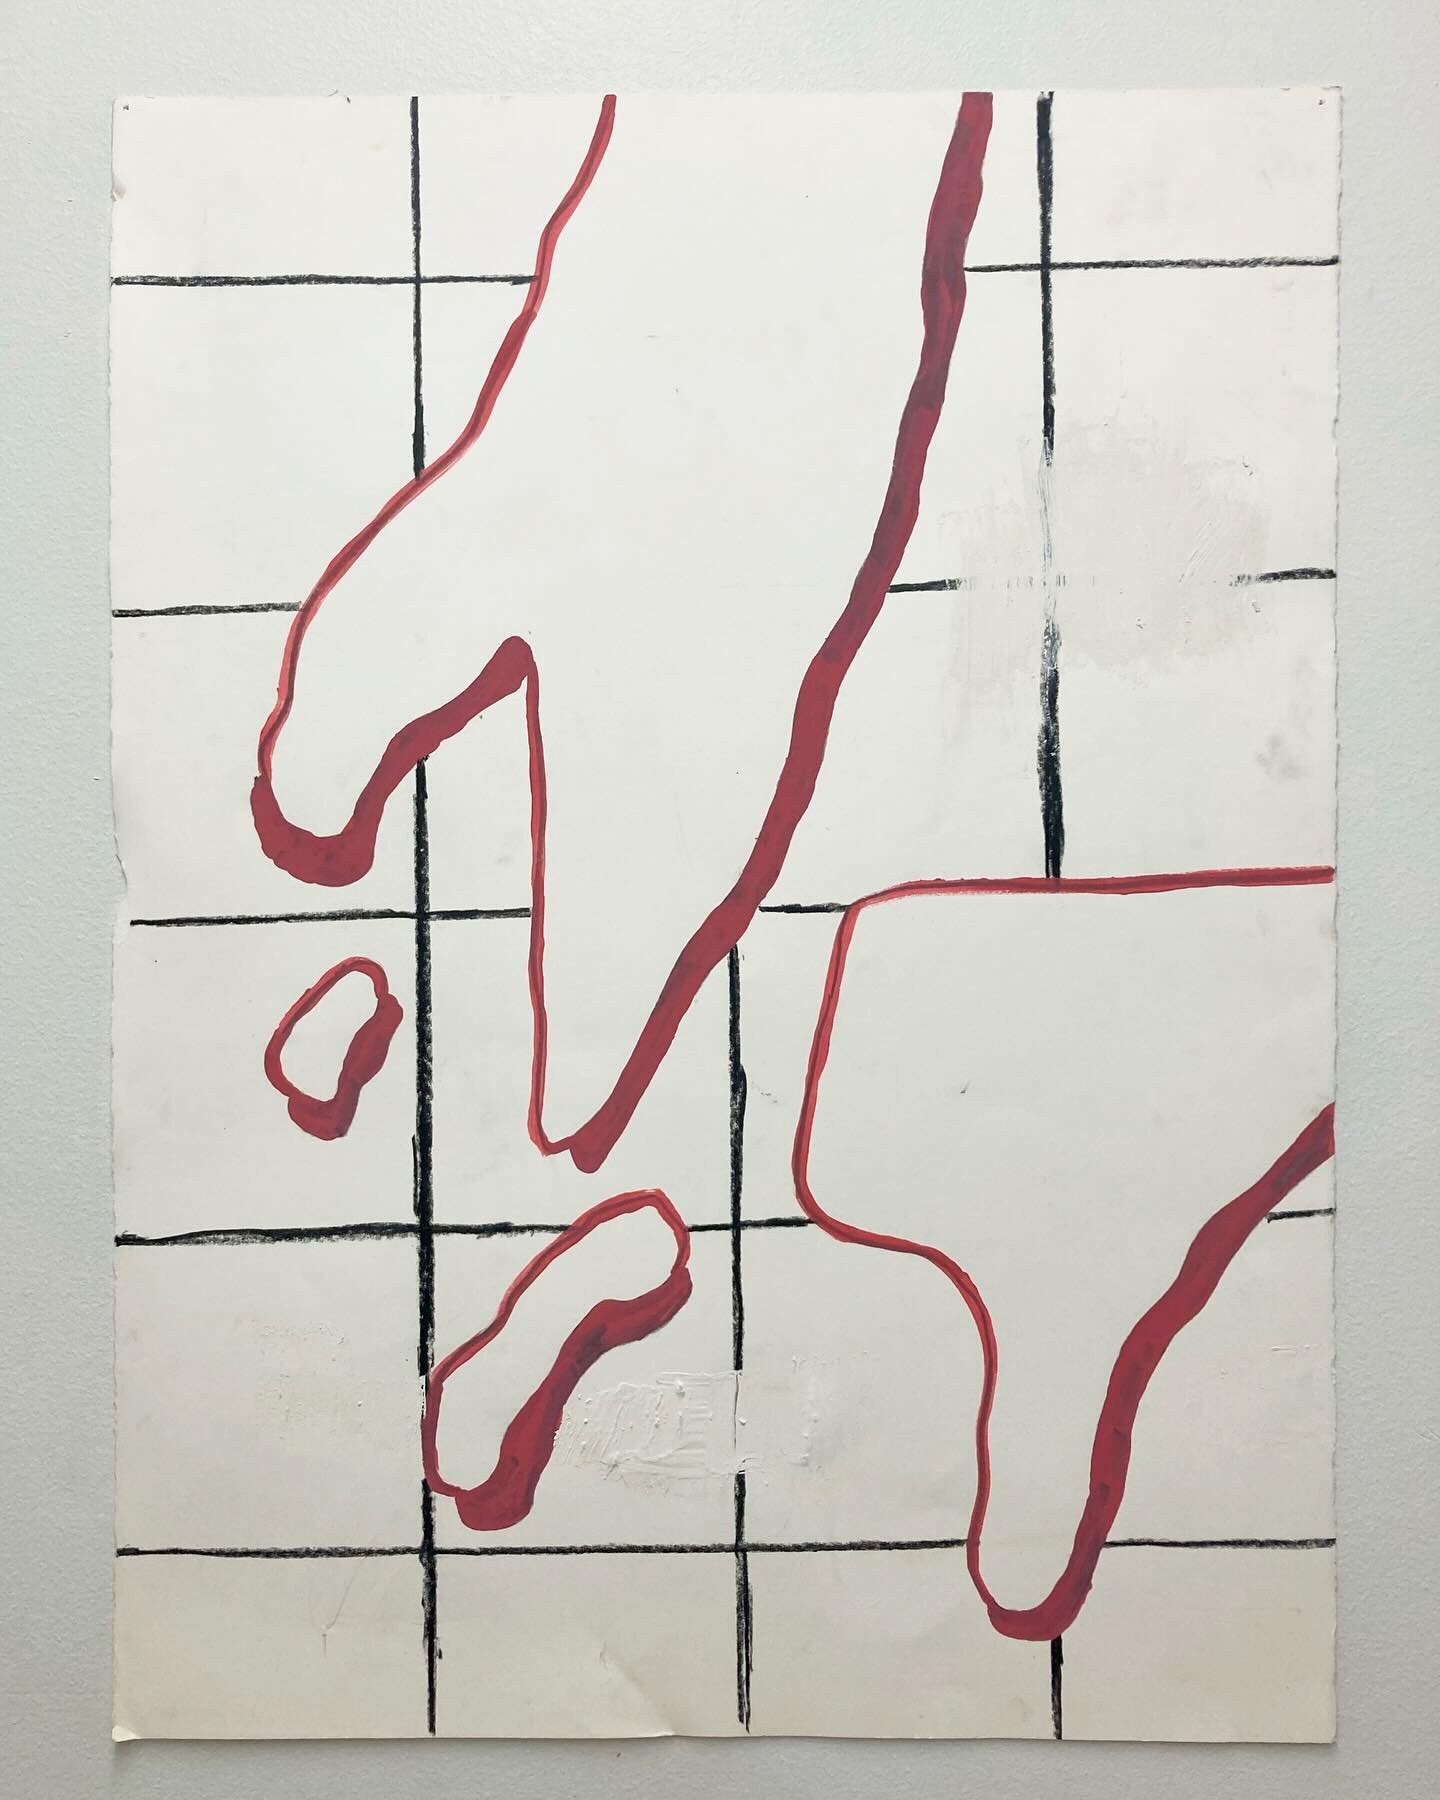 Untitled (Keyed Diamante), 2005

Graphite, crayon, and enamel on printmaking paper [30x44 in; 76.2x111.75 cm]